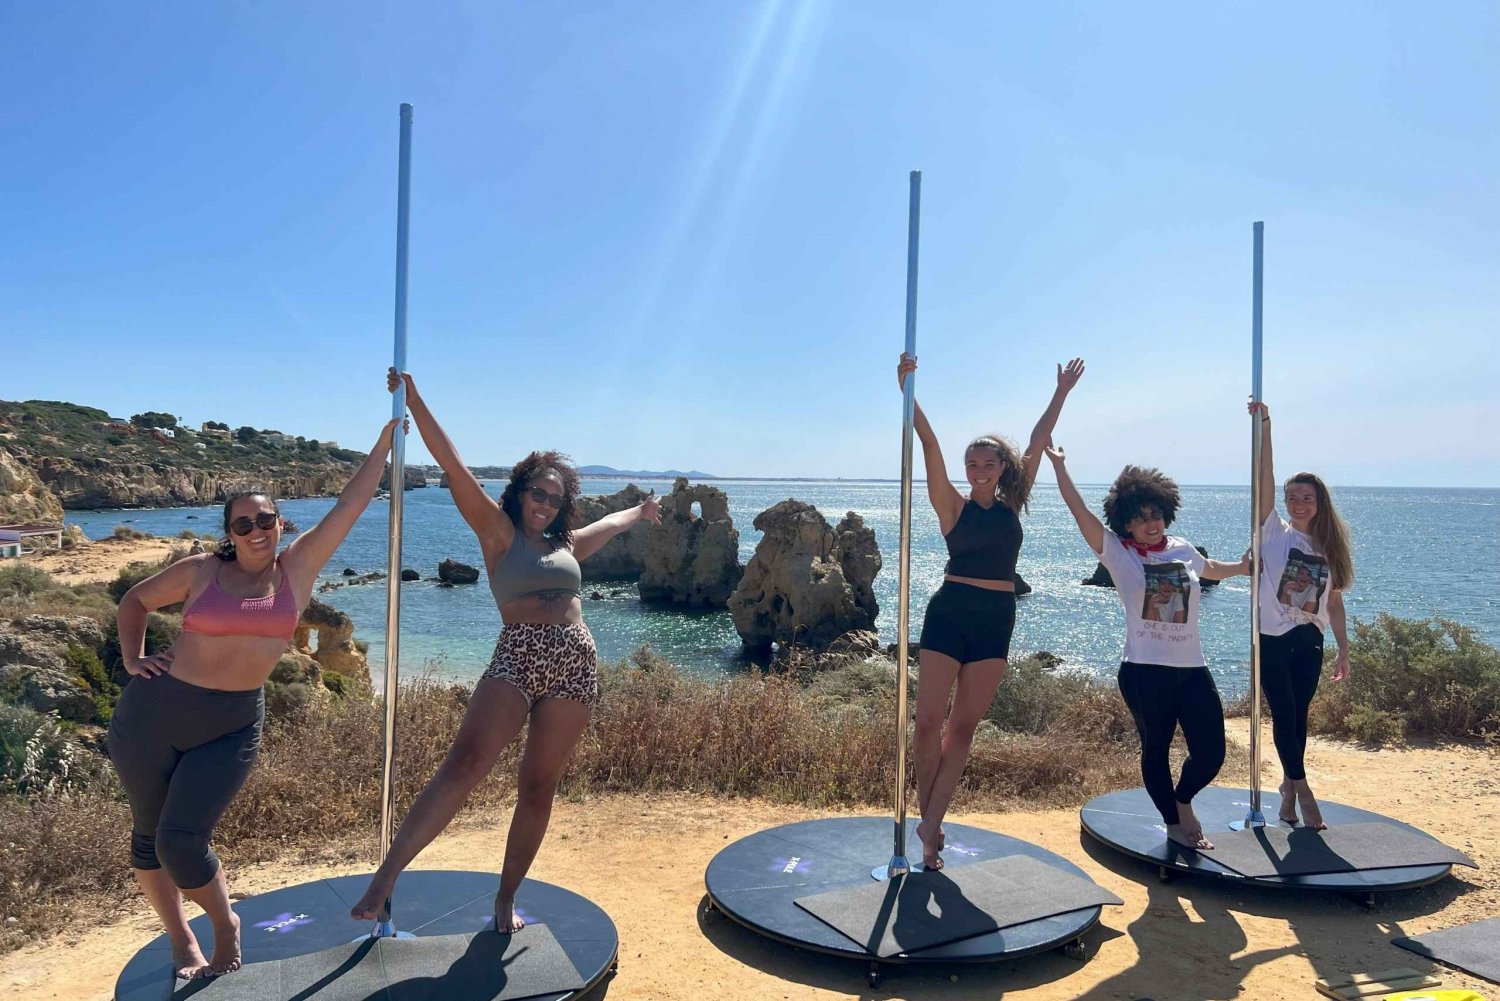 Algarve: Ocean View Pole Dance Experience with Prosecco